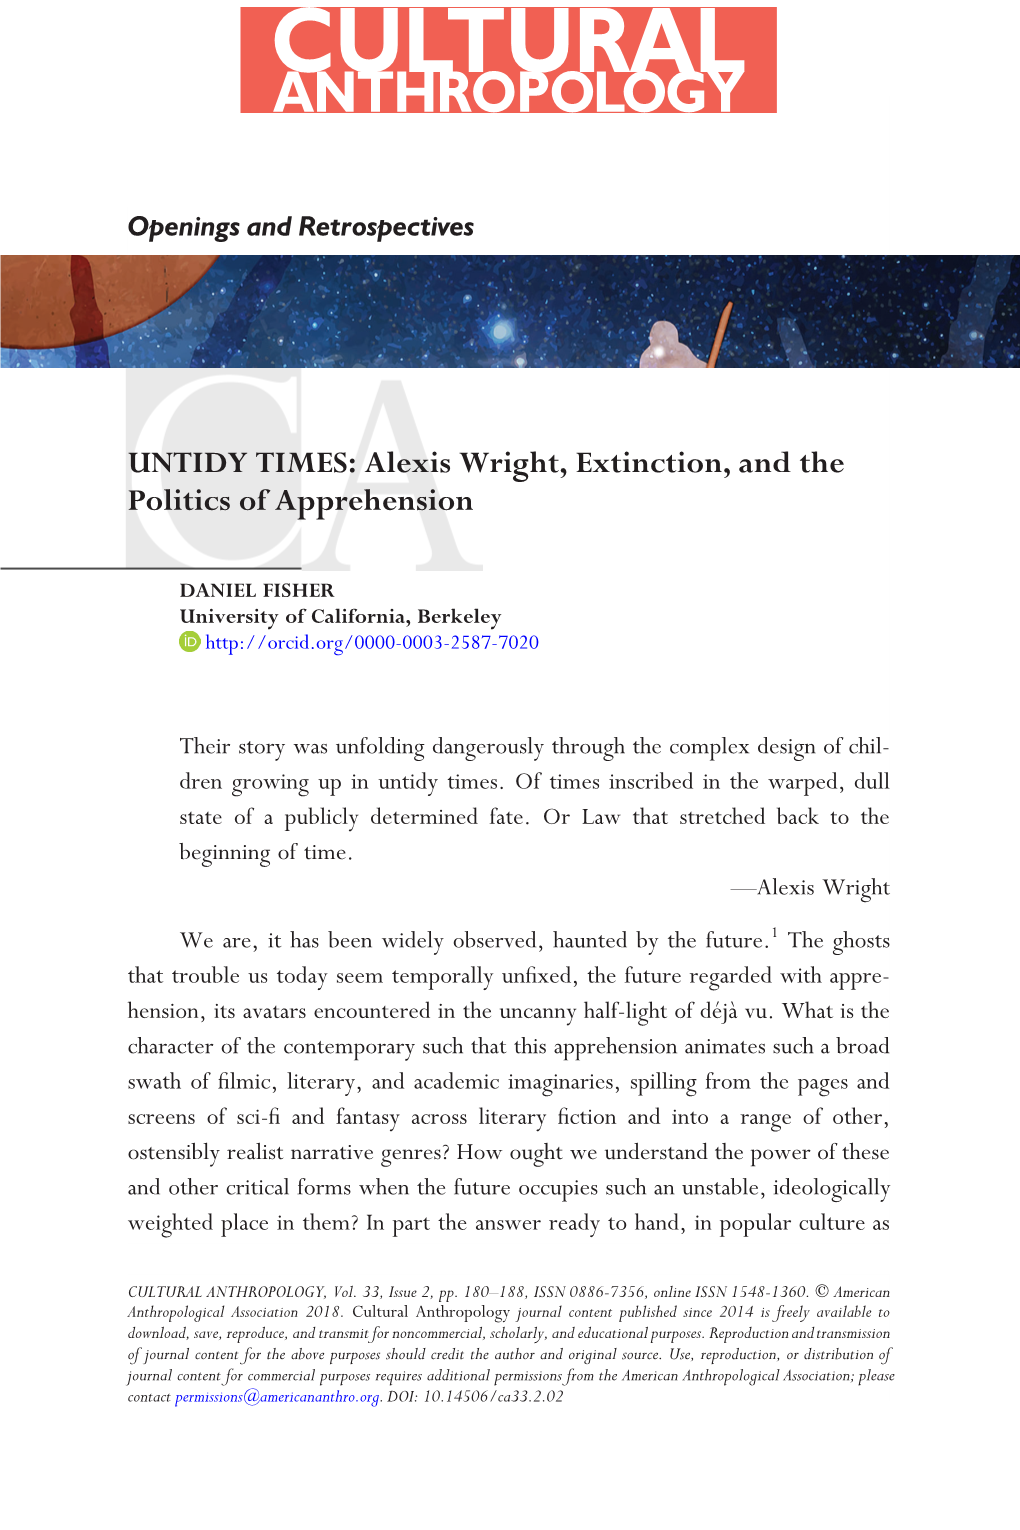 Alexis Wright, Extinction, and the Politics of Apprehension